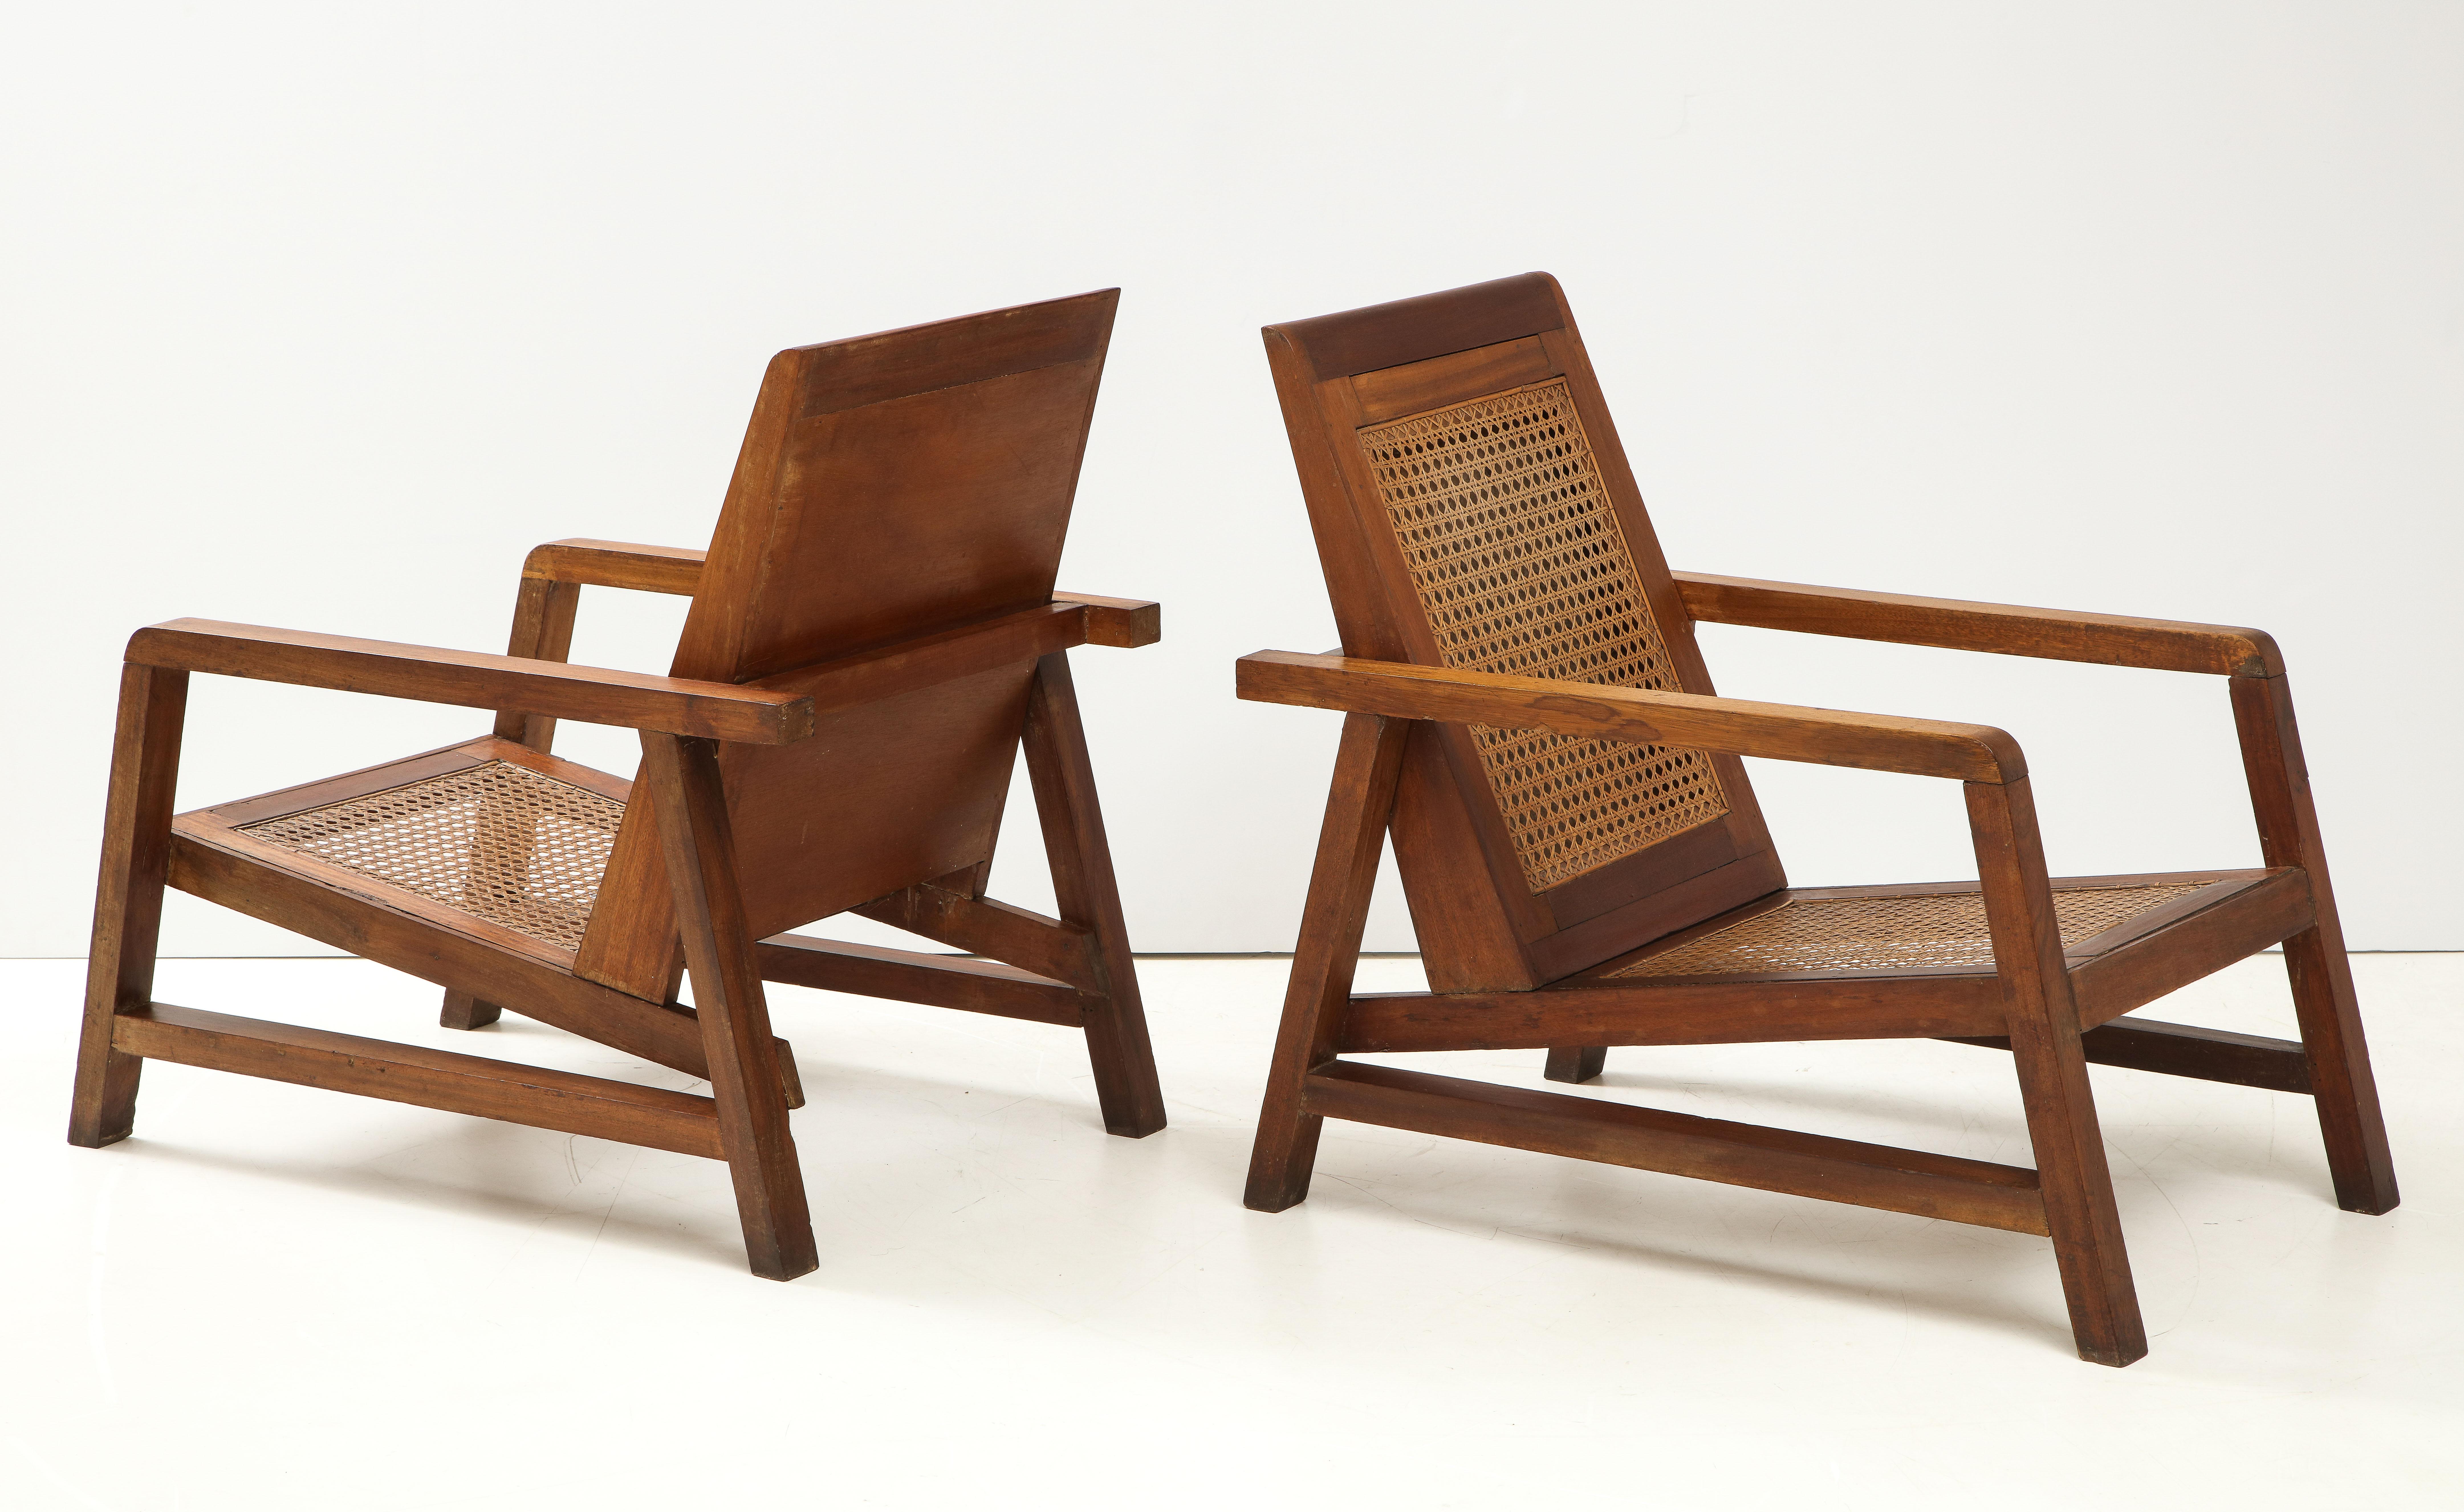 Pair of chairs in the style of Pierre Jeanneret for Chandigarh, made by an architect in the modernist form.
Mahogany & Cane 

Measures: H. 32.5, W 24, D 34 in.
  